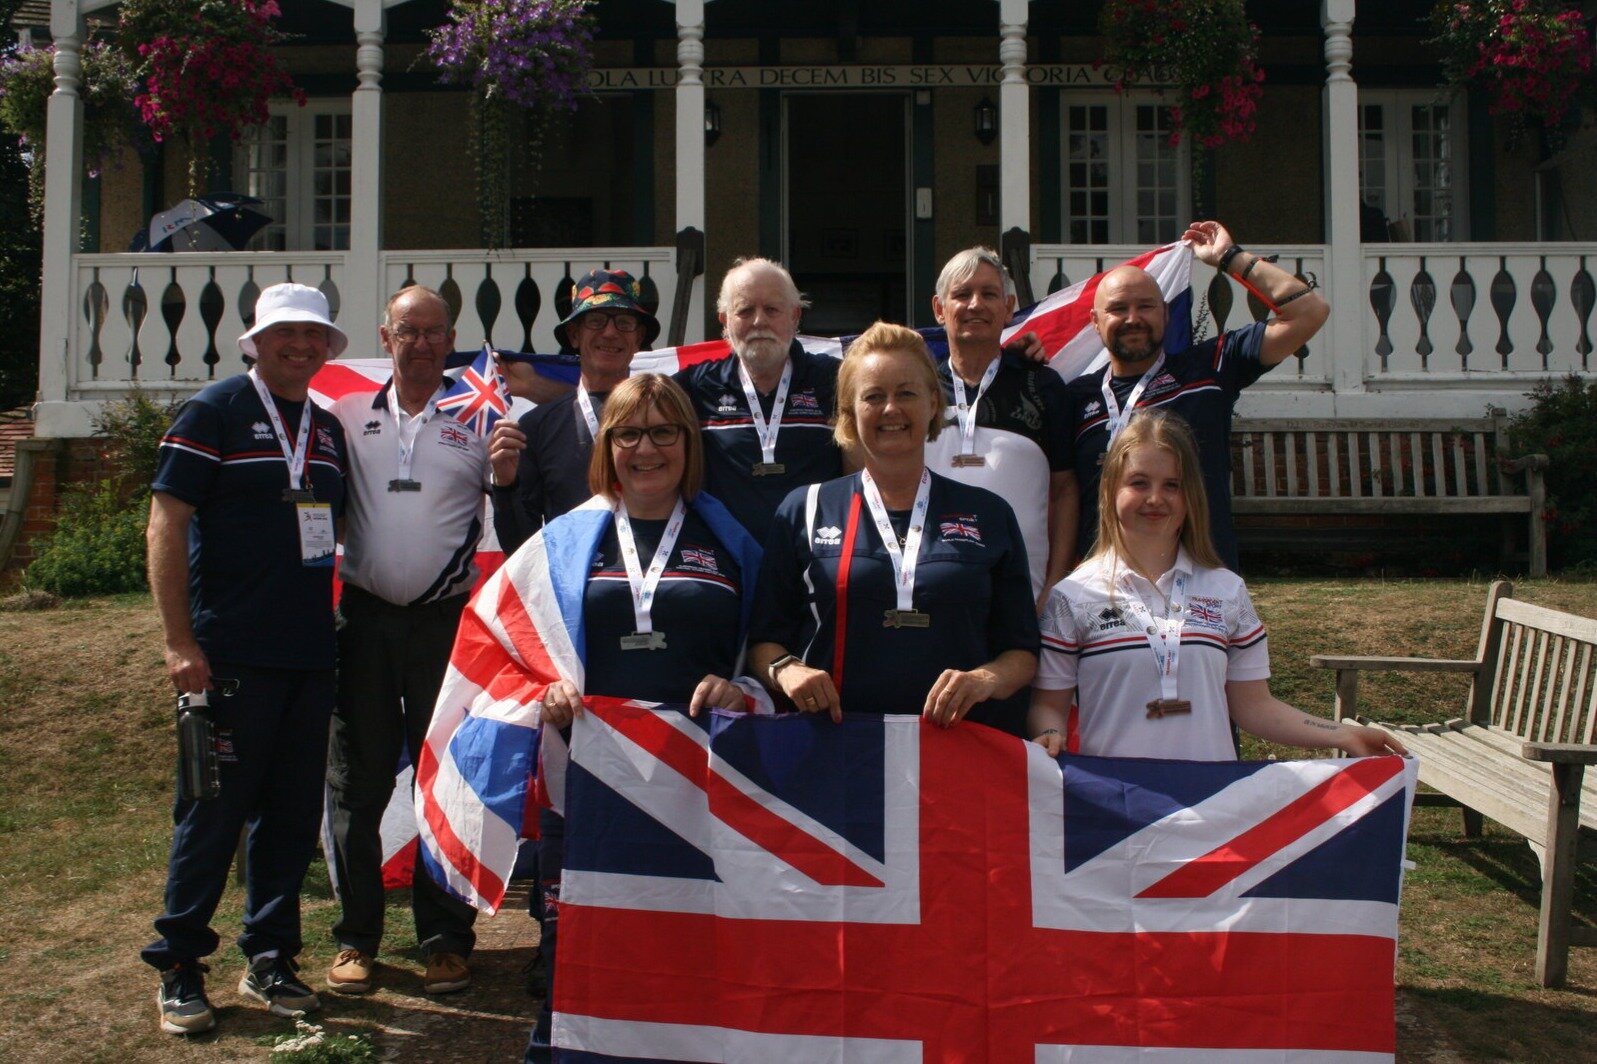 10 Archery Medals at the European Transplant & Dialysis Games